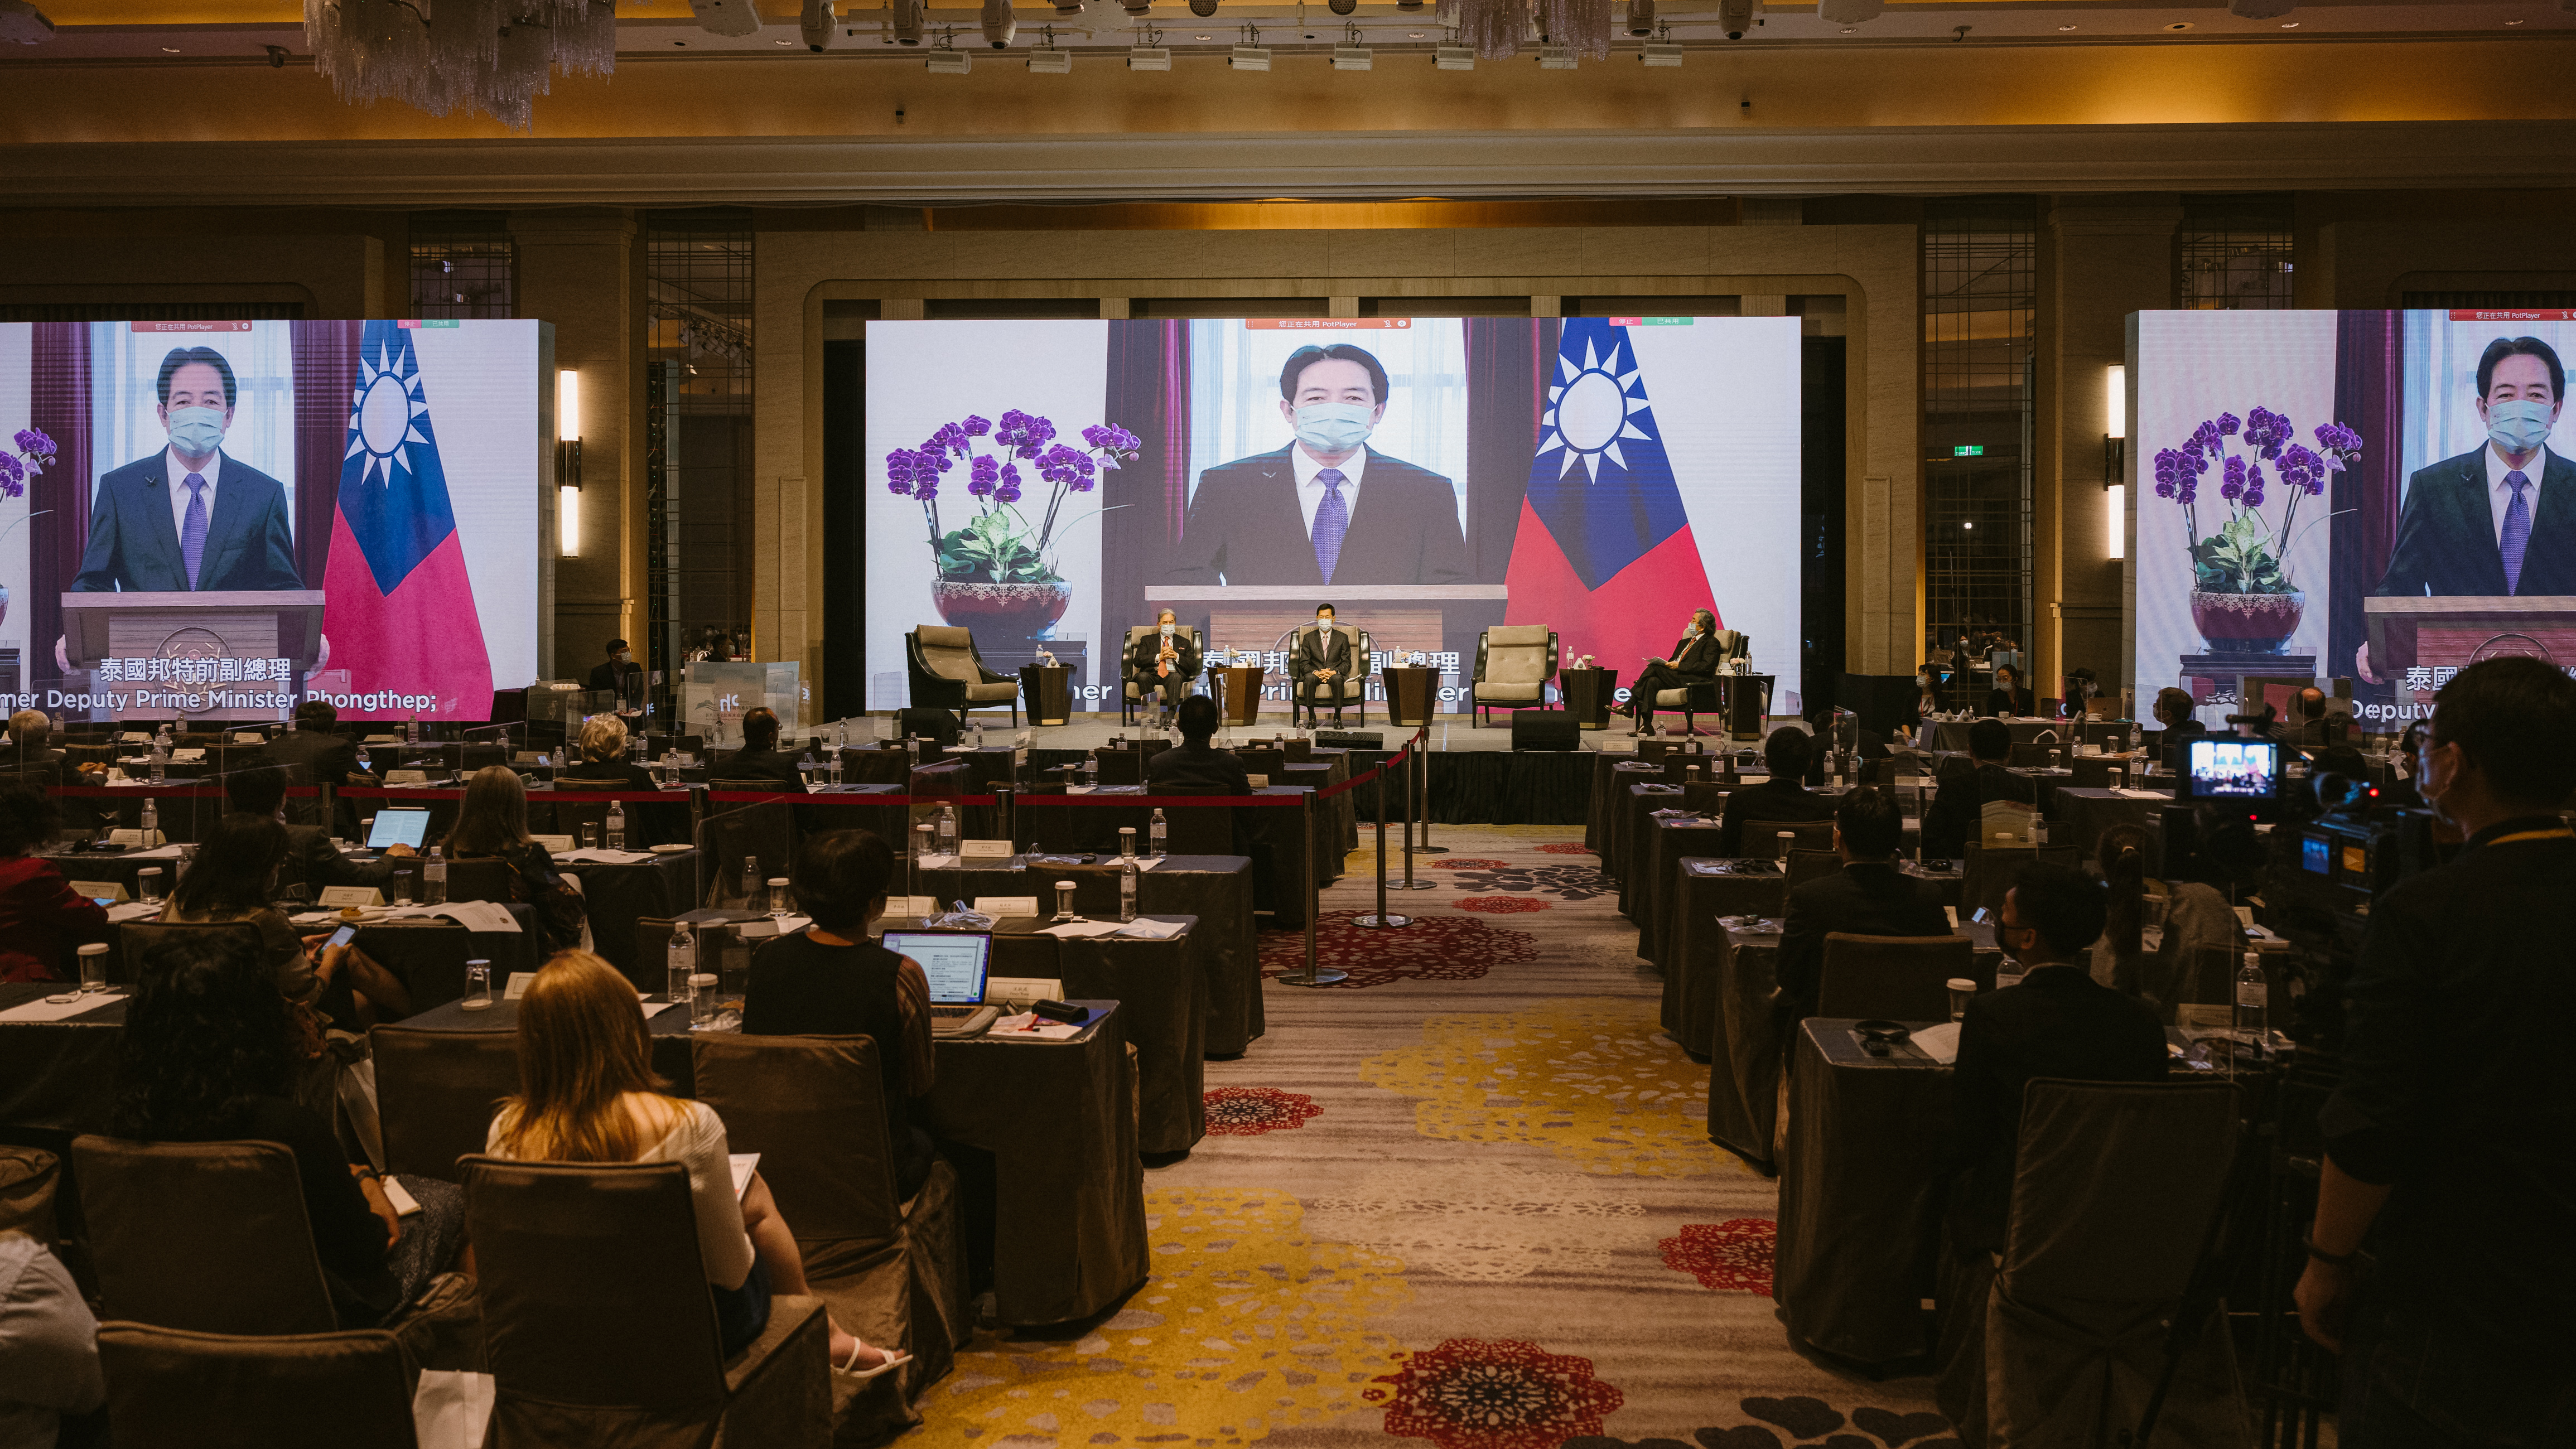 Session III: Asia Prospect Roundtable: Revitalizing, Reorienting, and Reconnecting